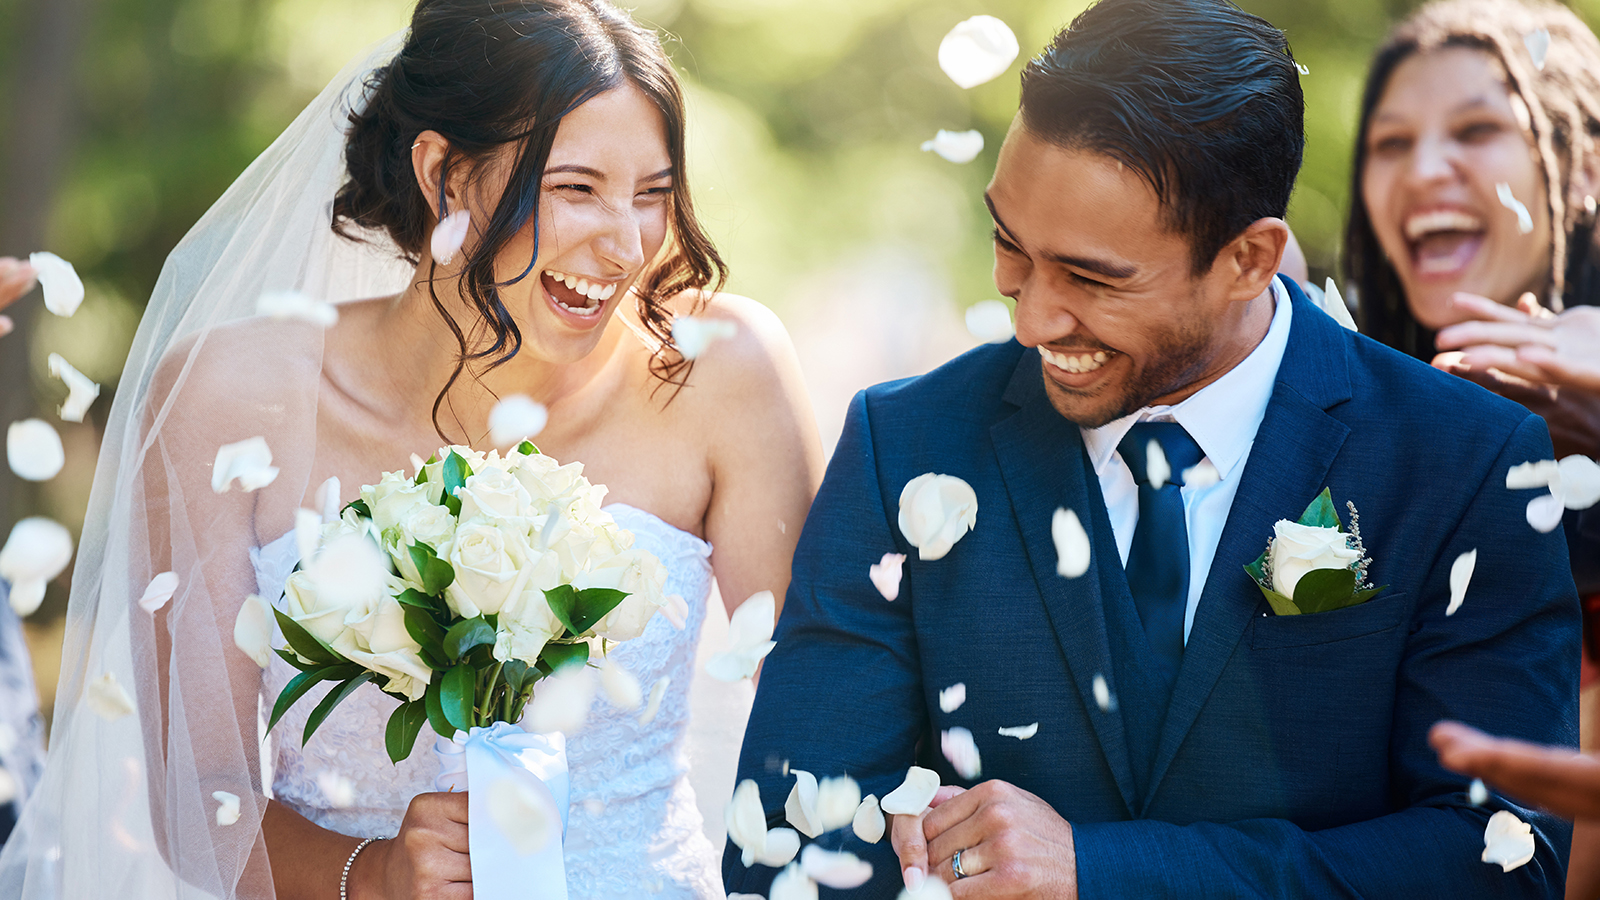 Love, wedding and couple walking with petals and guests throwing in celebration of romance. Happy, smile and young bride with bouquet and groom with crowd celebrating at the outdoor marriage ceremony.